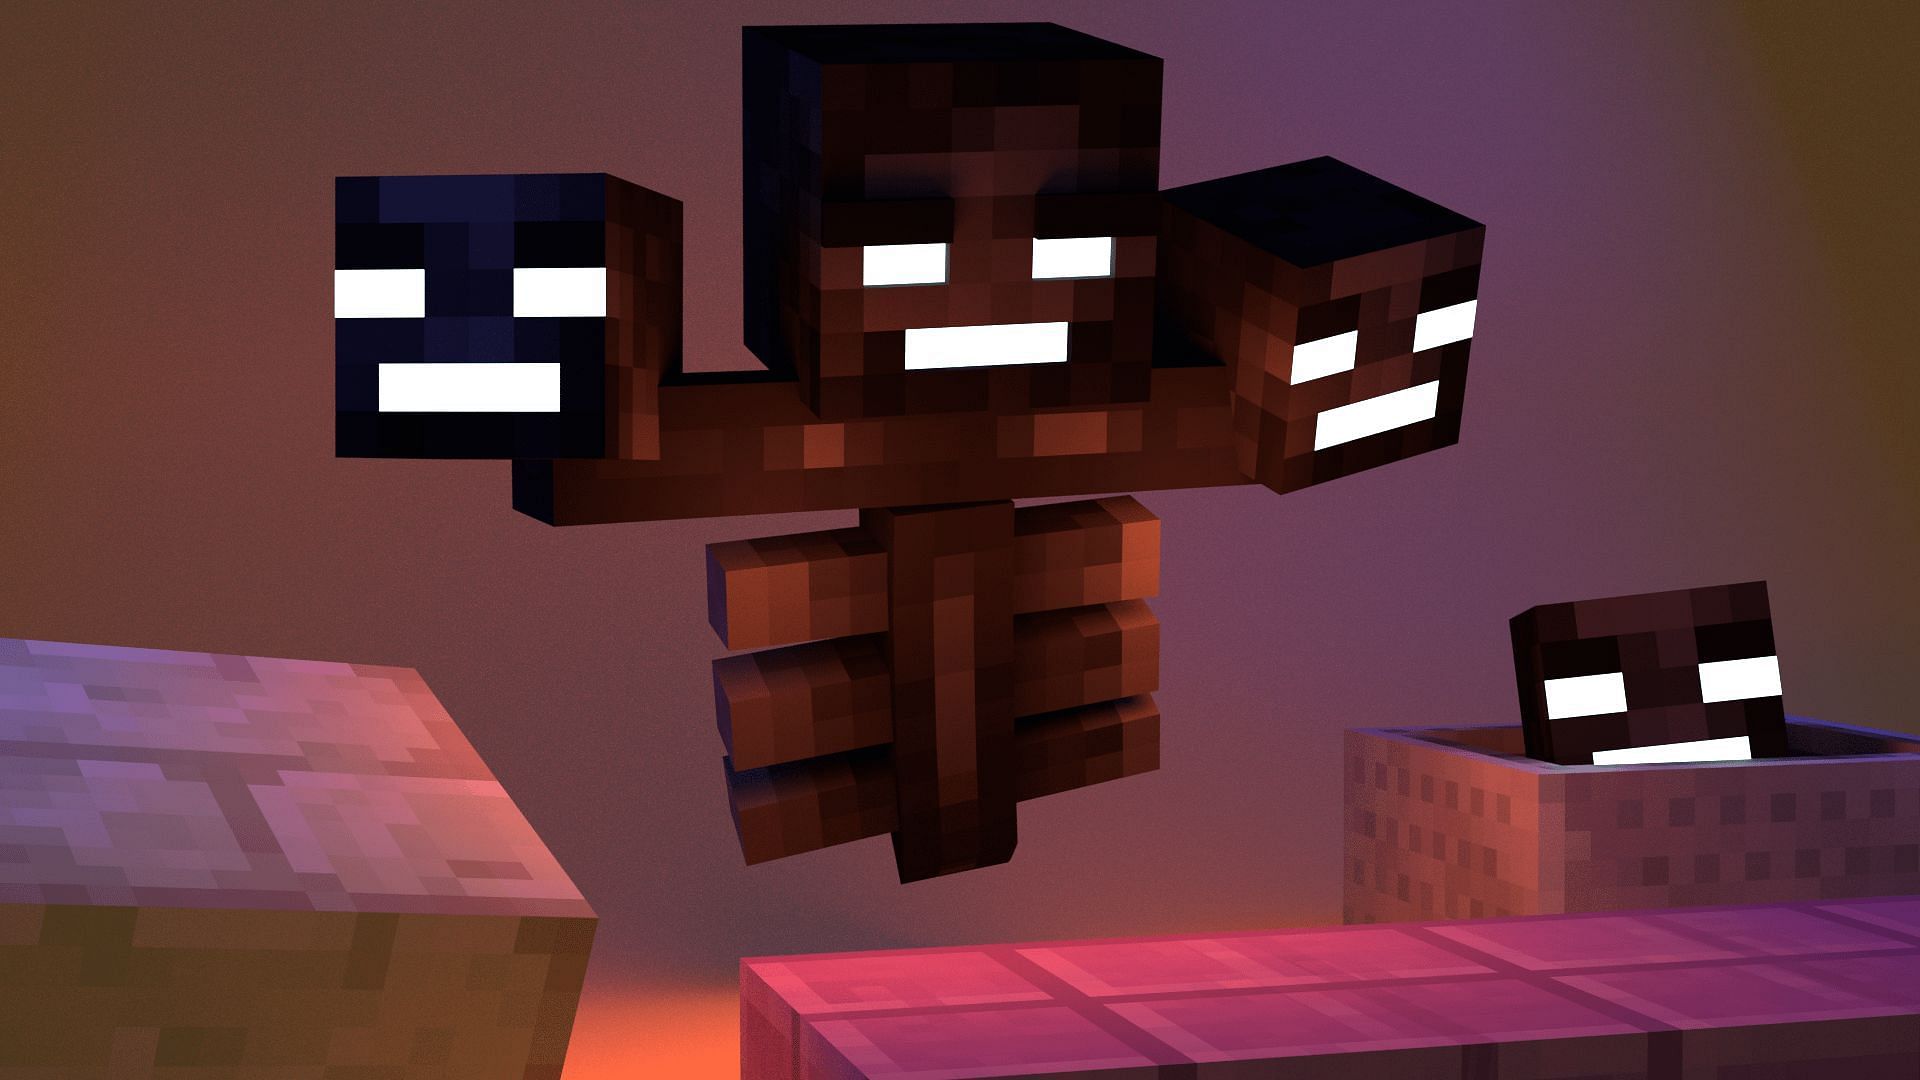 The Wither boss in Minecraft (Image via Reddit)